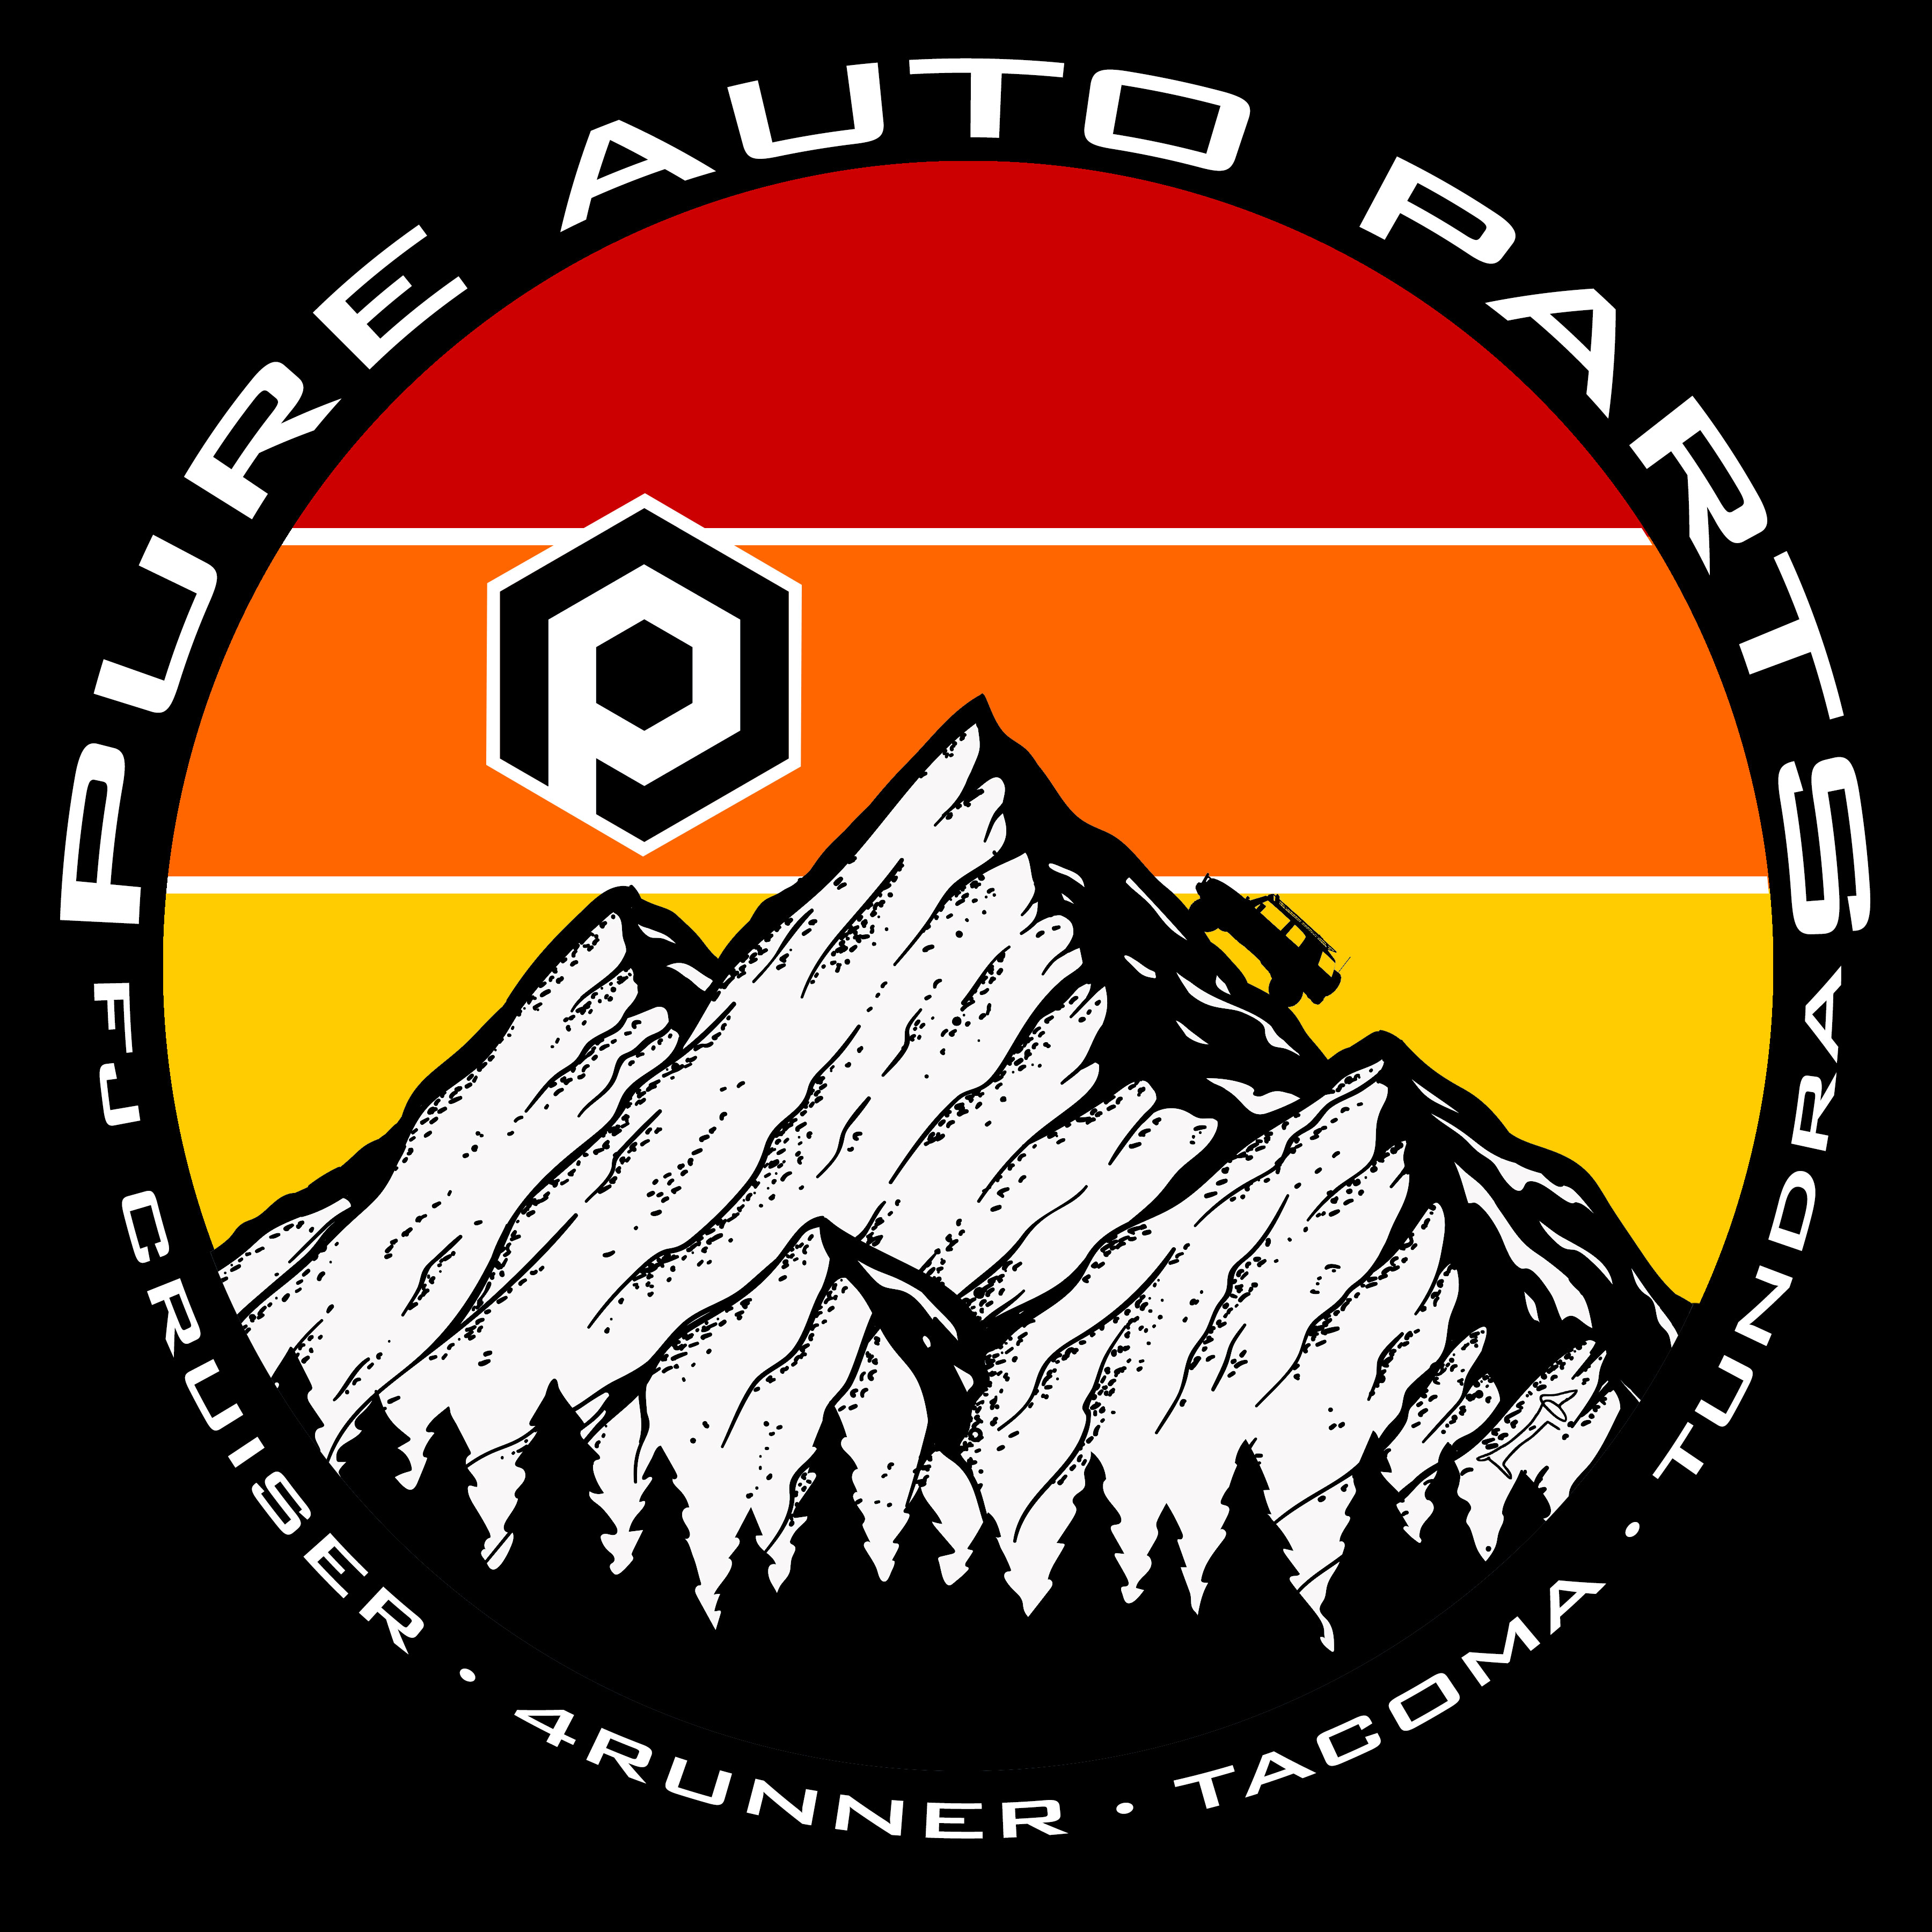 Pure Auto Parts - OverLanding T-Shirt - GREY - FREE SHIPPING